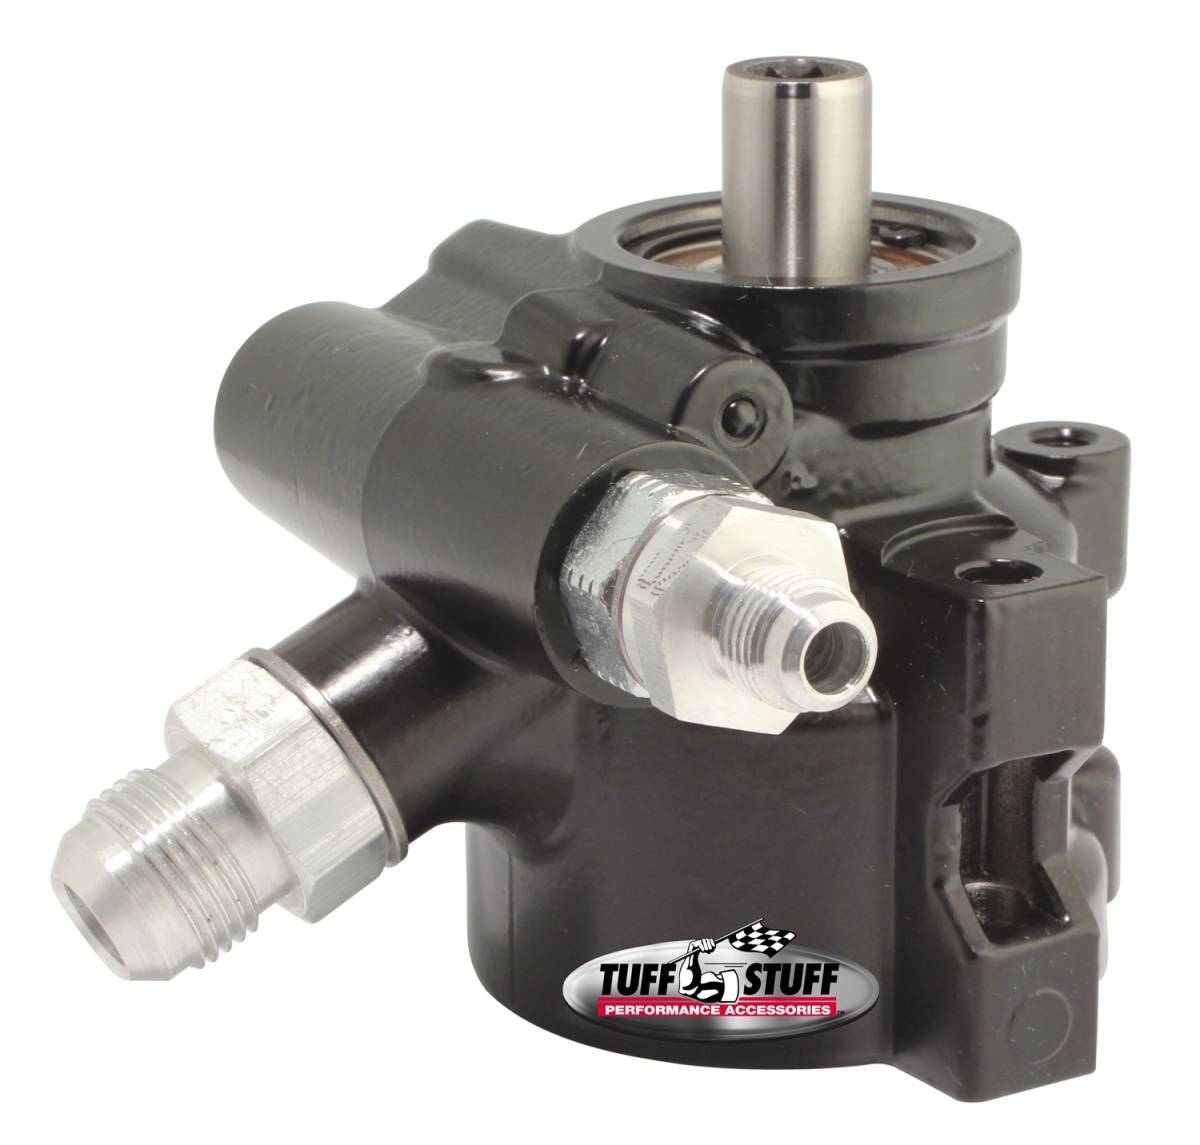 Tuff Stuff Performance - Type II Alum. Power Steering Pump AN-6 And AN-10 Fitting 8mm Through Hole Mounting Aluminum For Street Rods/Custom Vehicles w/Limited Engine Space Black 6175ALB